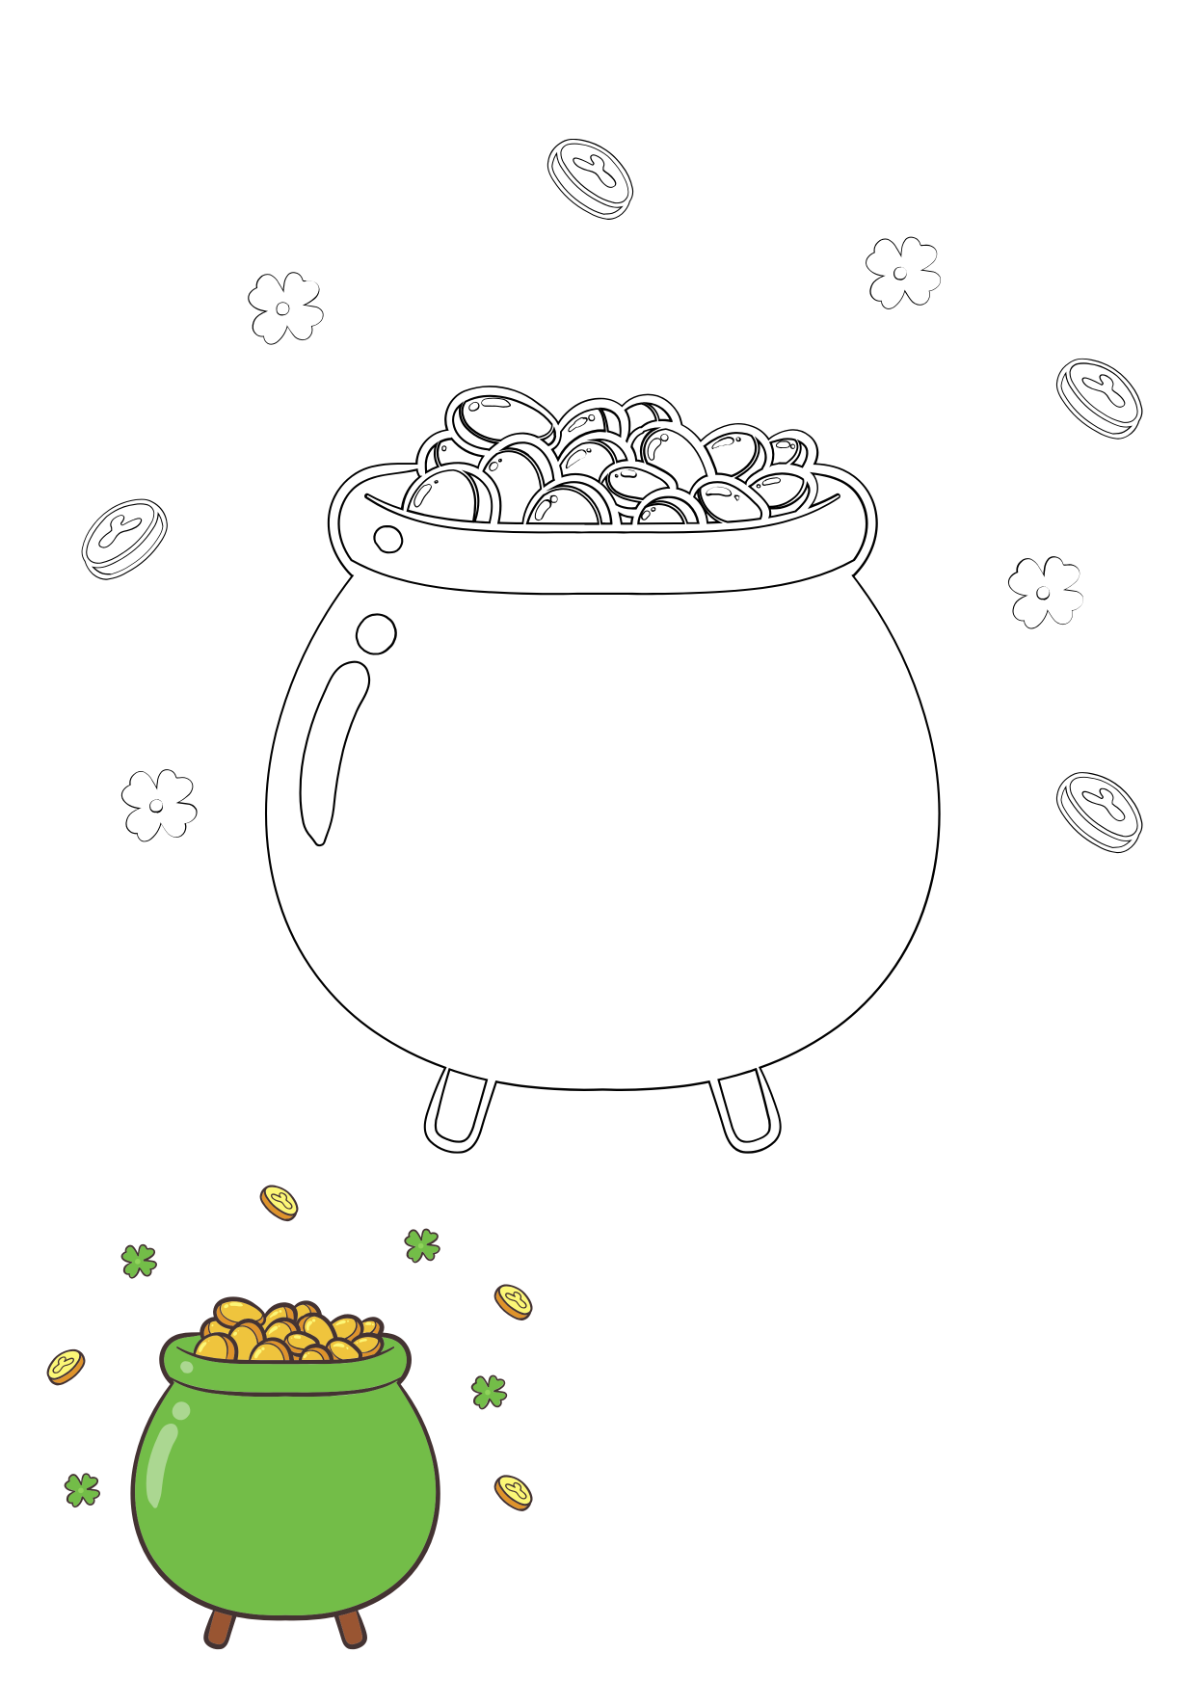 St. Patrick’s Day Coloring Page Template